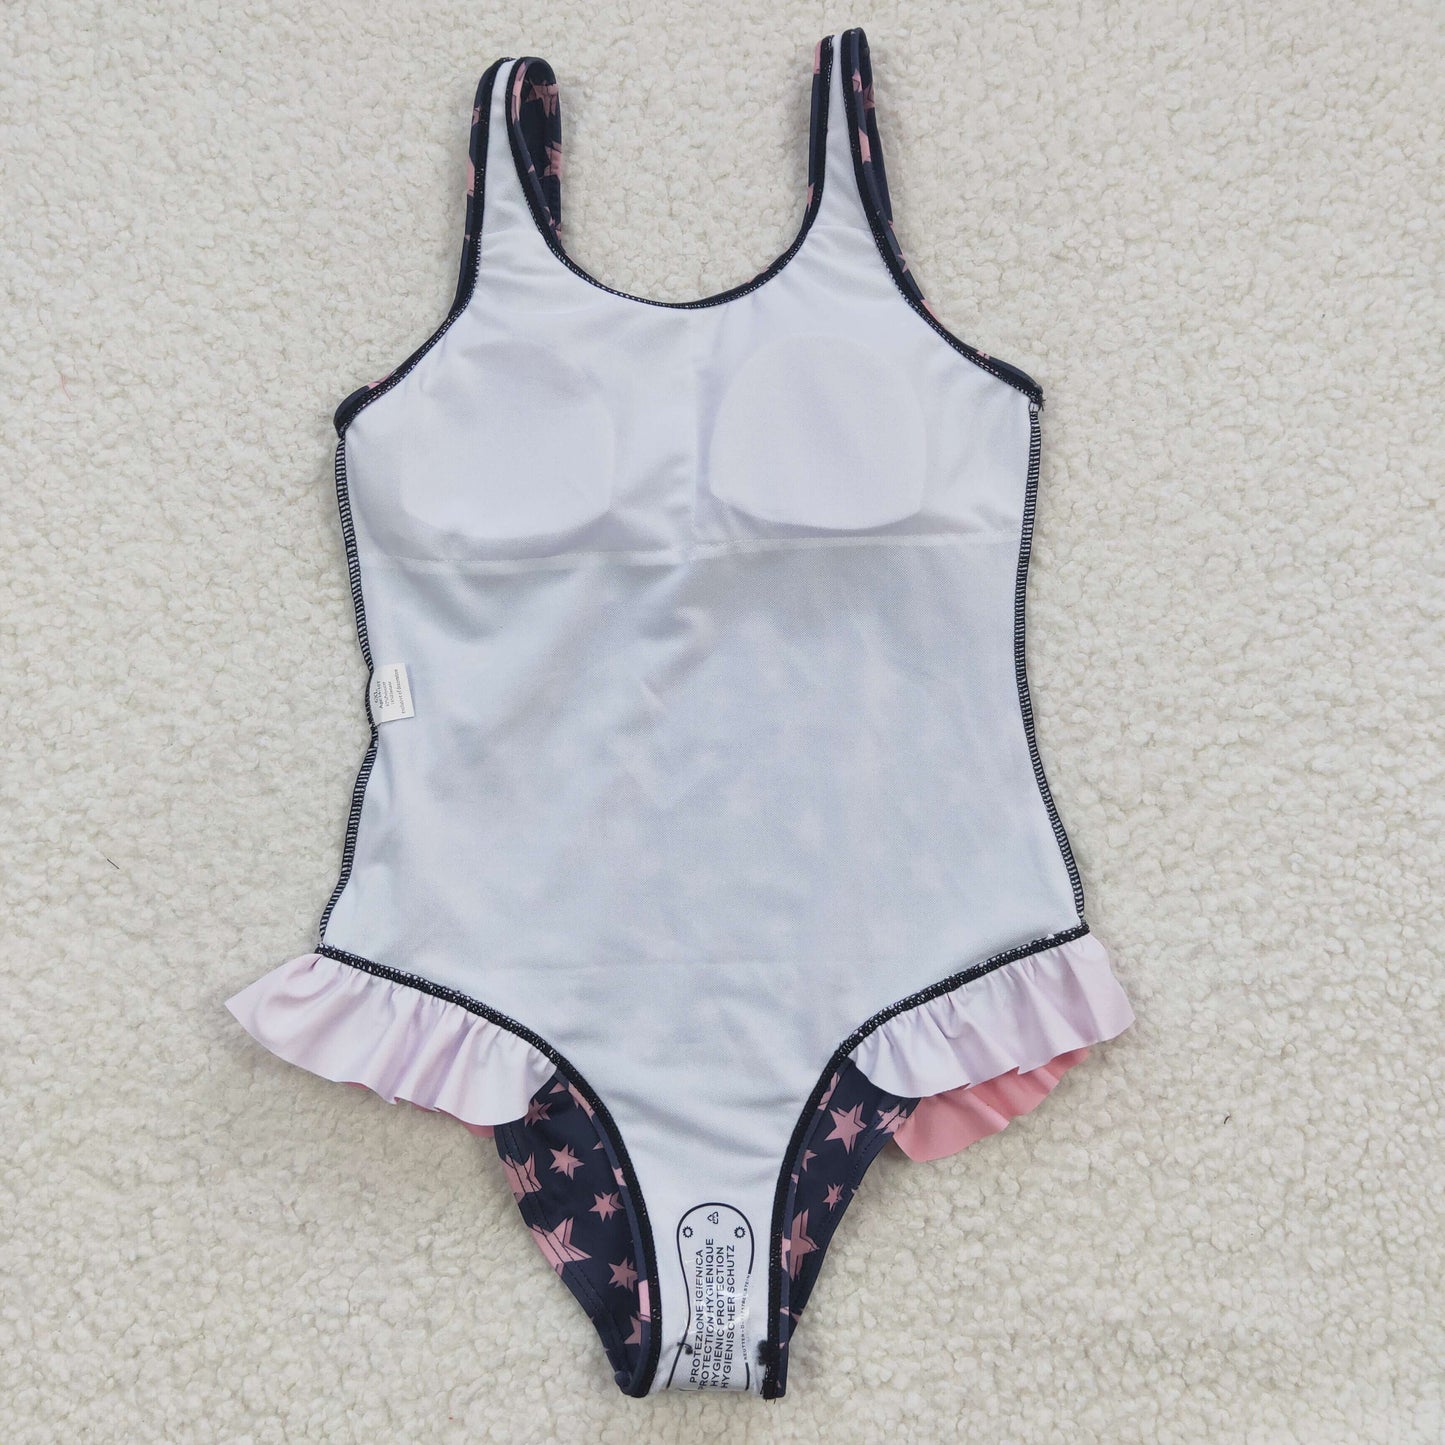 Baby Girls Cow Print Western Swimsuits